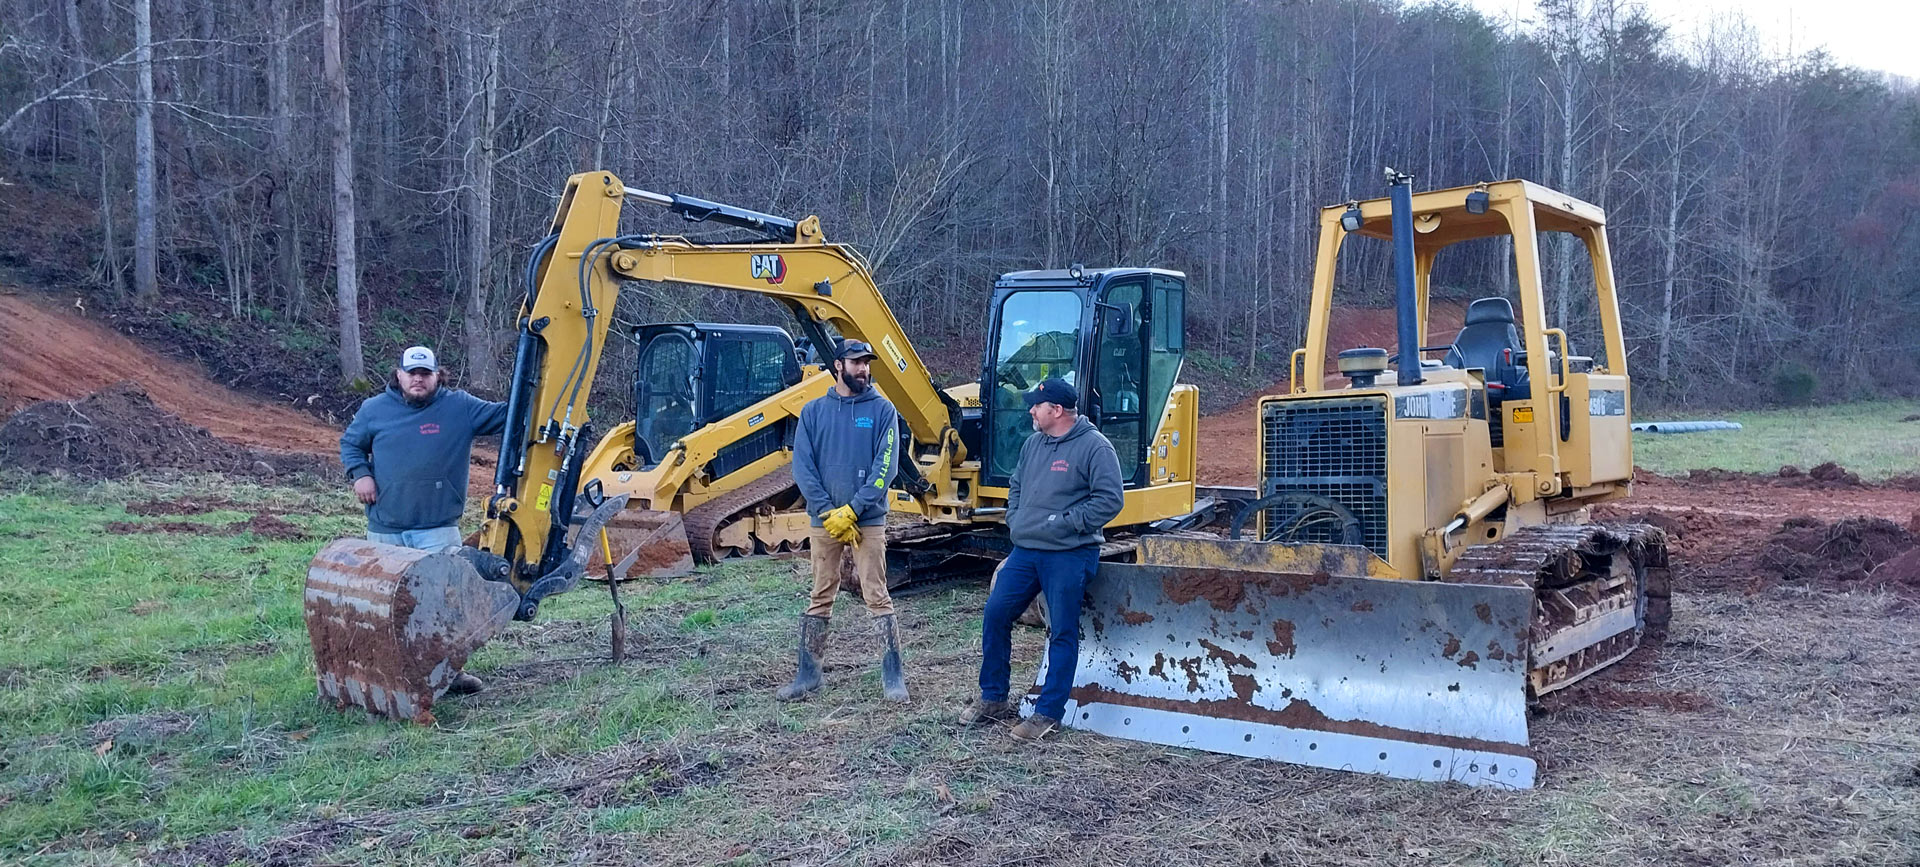 Jason Price and his team with heavy equipment lined up on a mountain roadbuildng jobsite in Greene County, TN